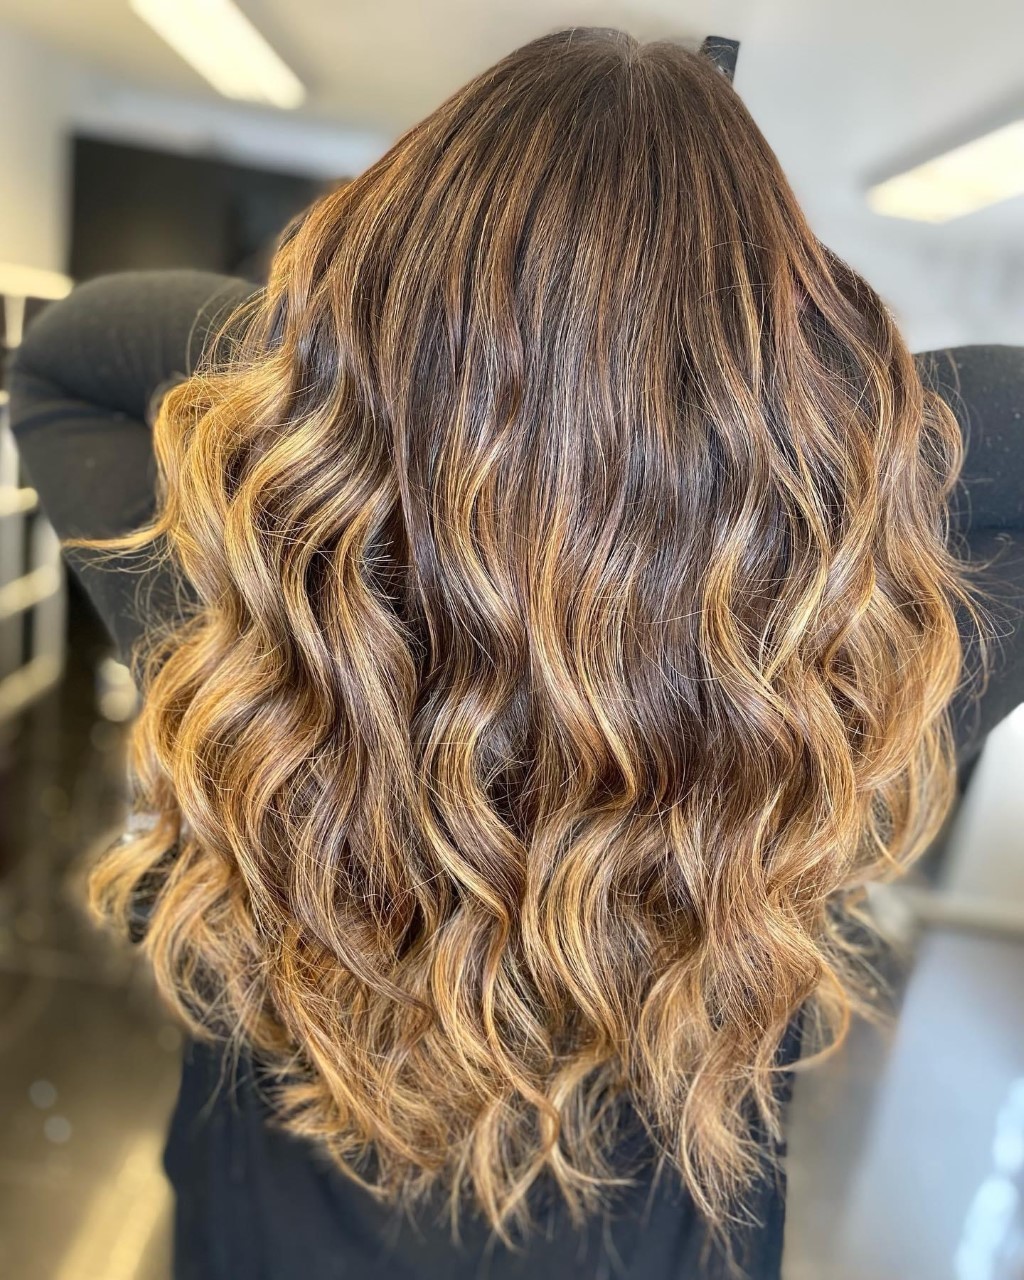 Bouncy, glossy waves